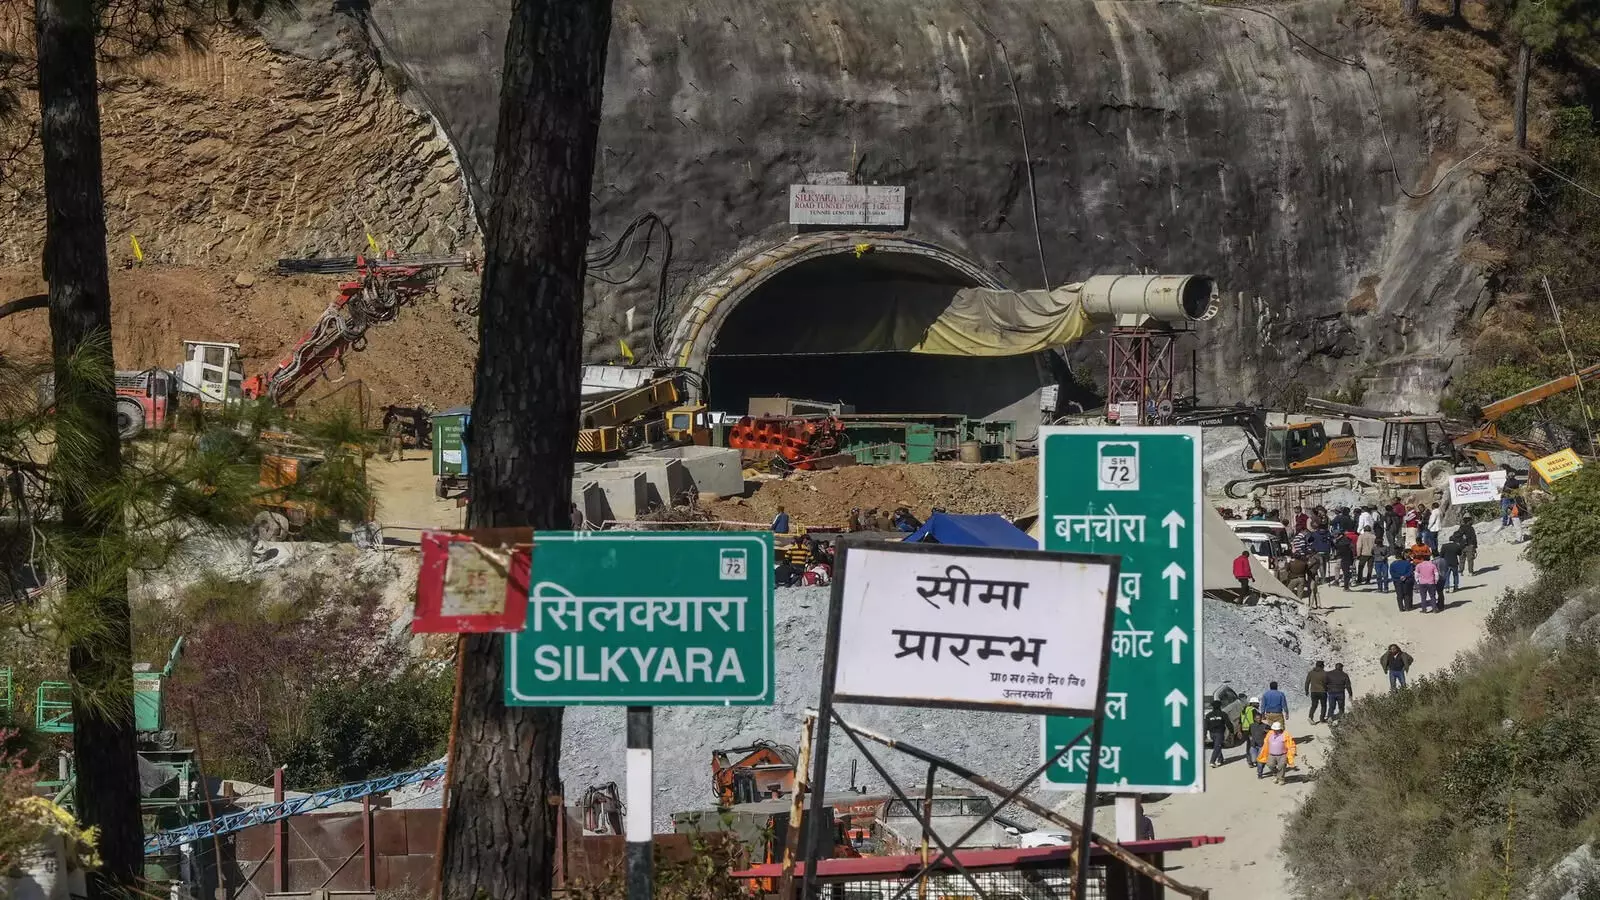 Arnold Dix: The International Tunnelling Expert Behind the Successful Uttarkashi Rescue